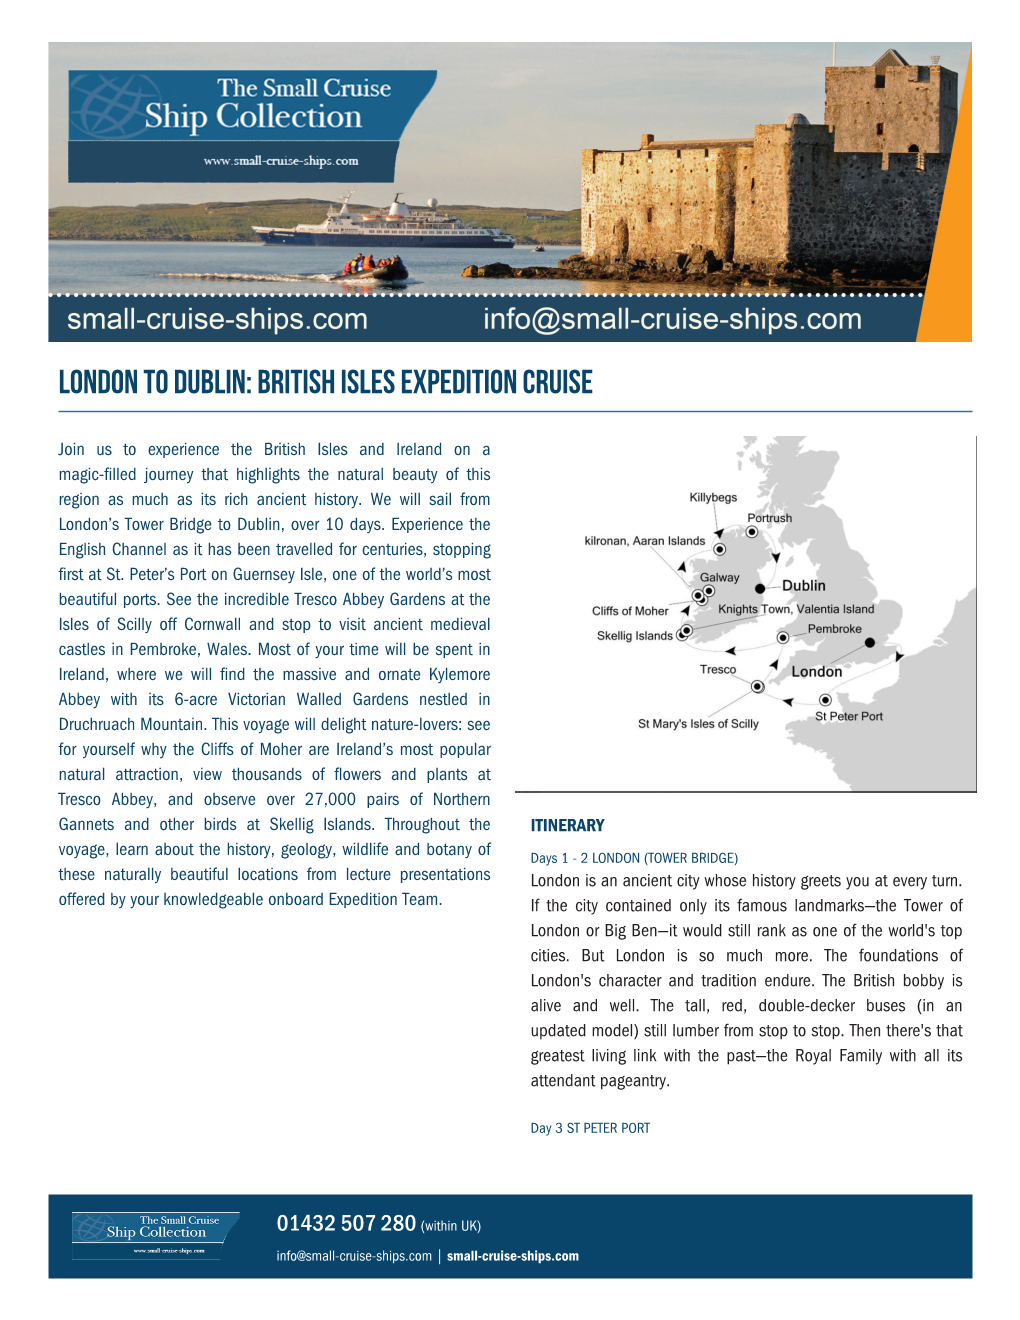 London to Dublin: British Isles Expedition Cruise